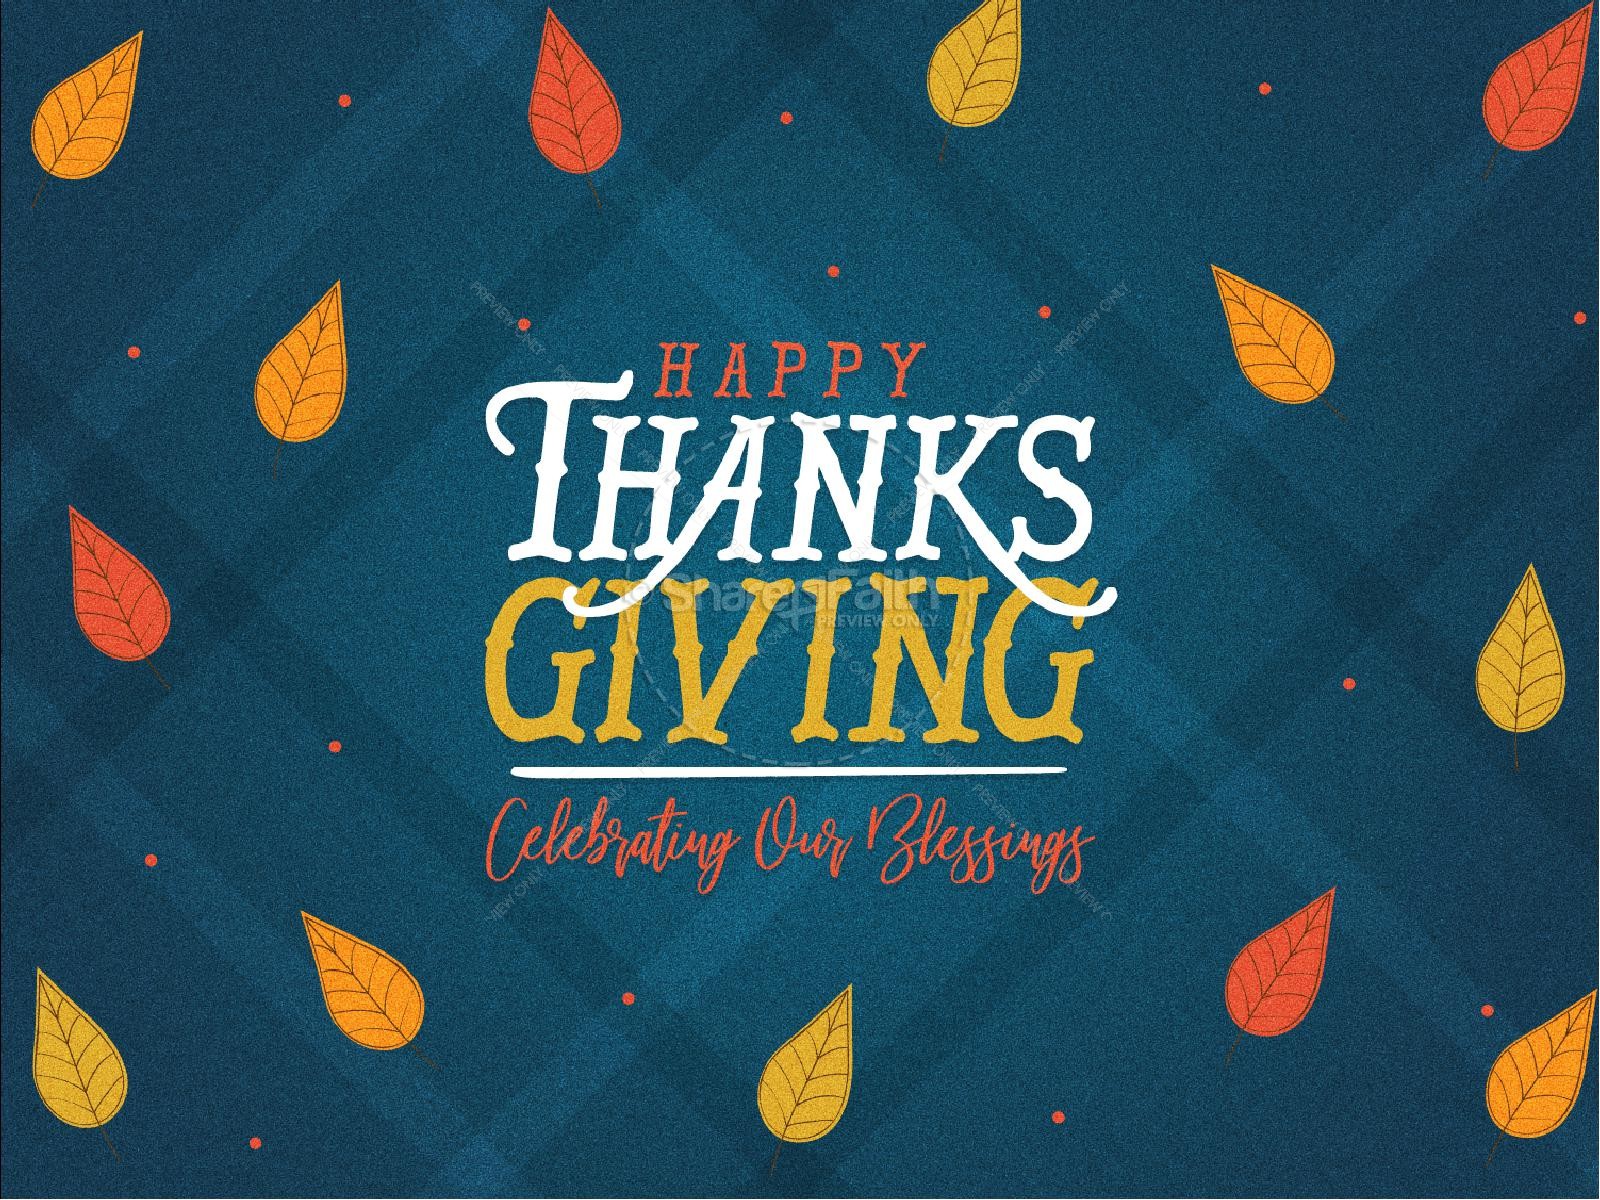 Celebrating Our Blessings Thanksgiving Church Powerpoint Thumbnail 1